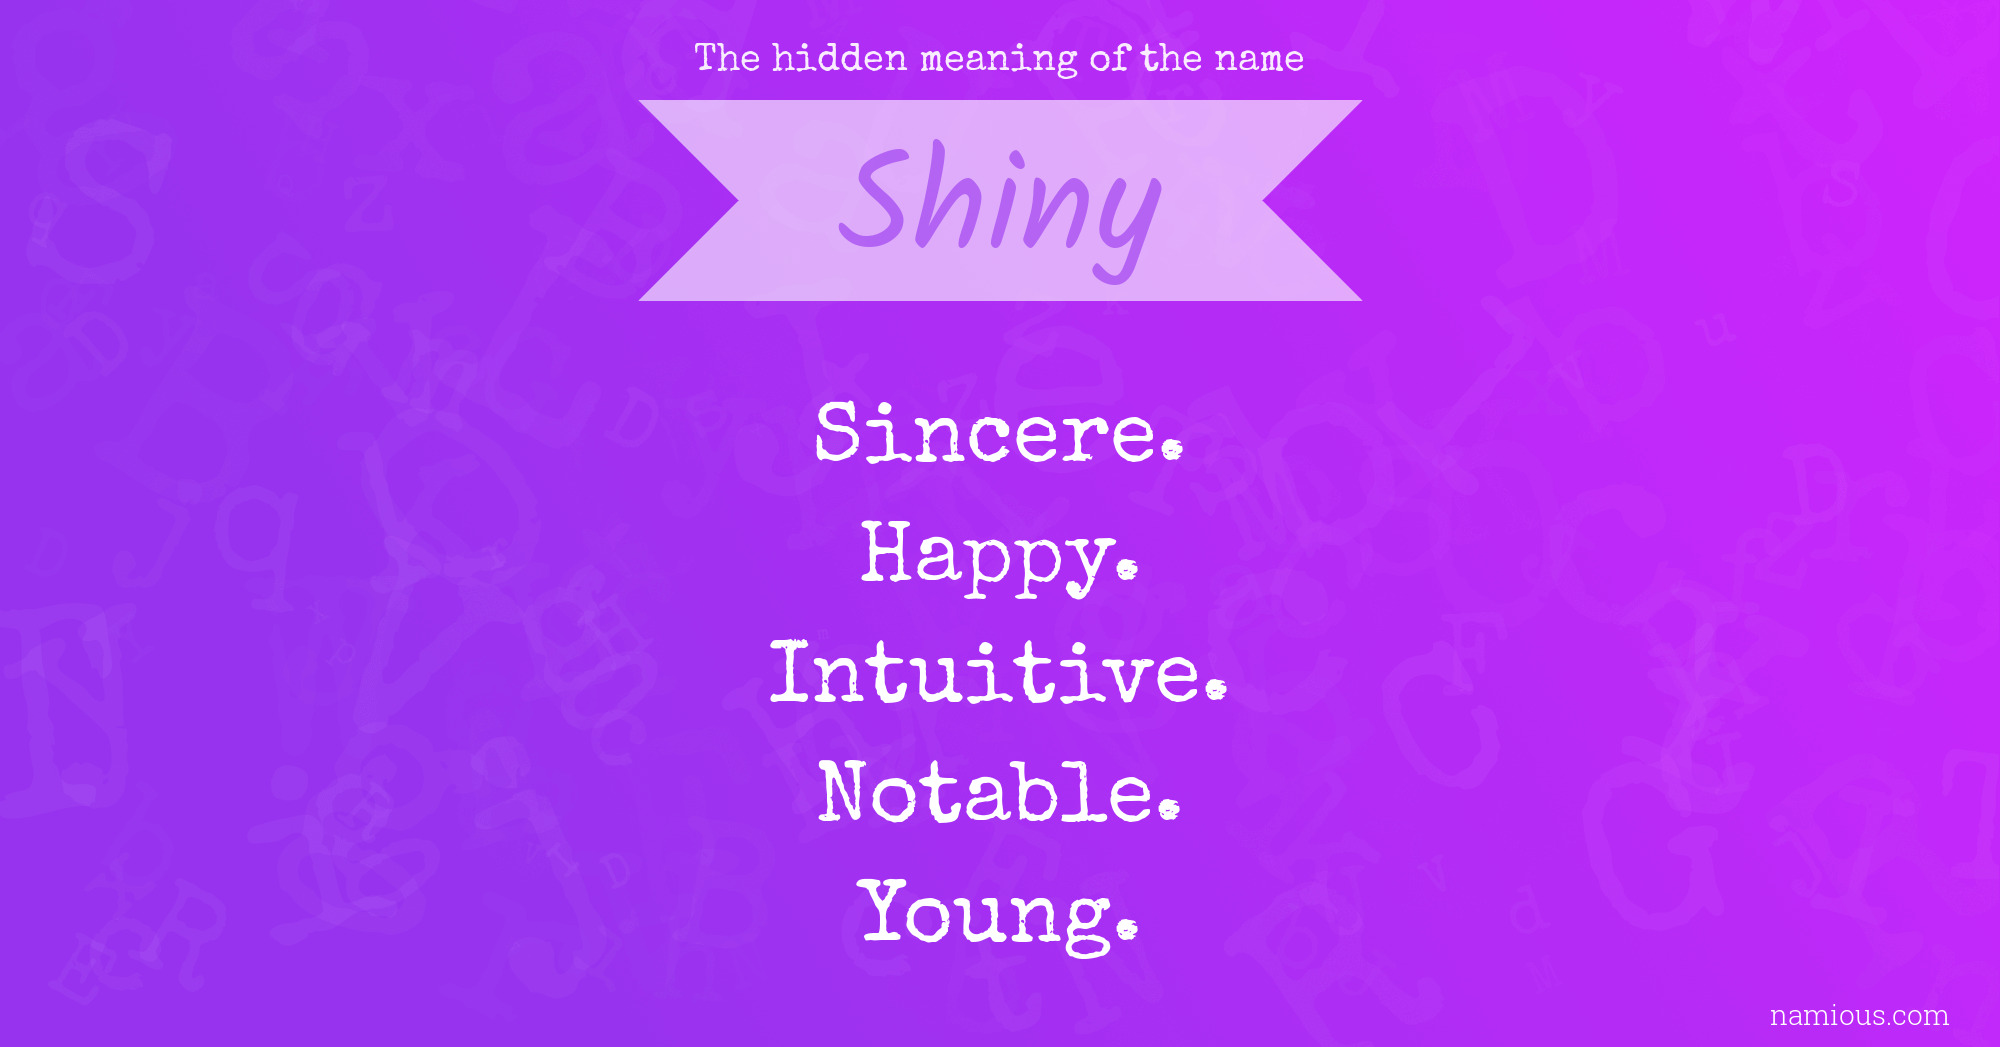 The hidden meaning of the name Shiny